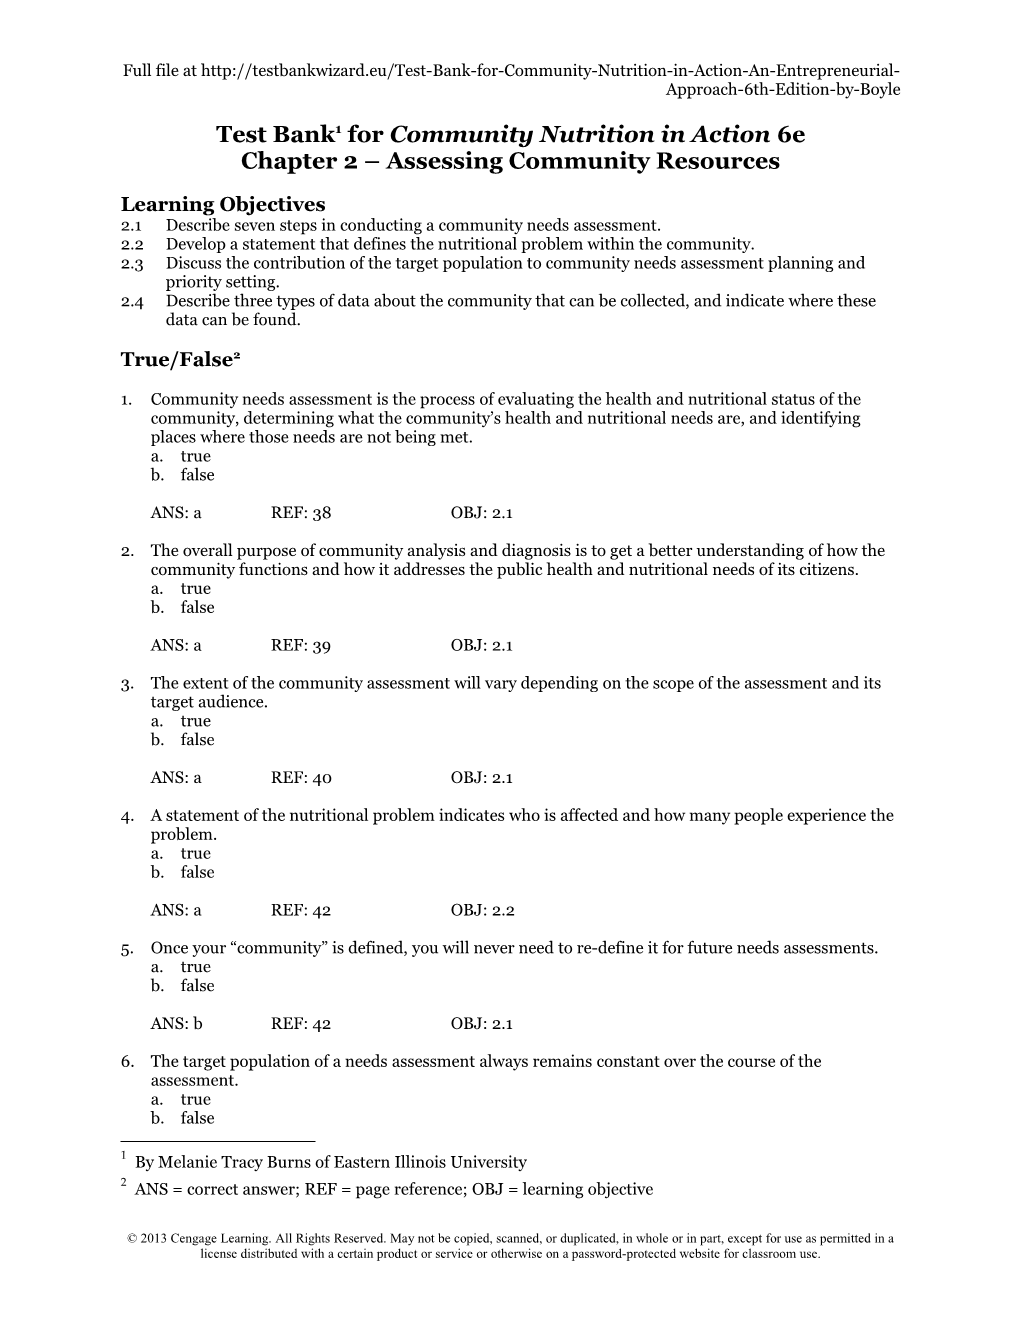 Chapter 2 Assessing Community Resources